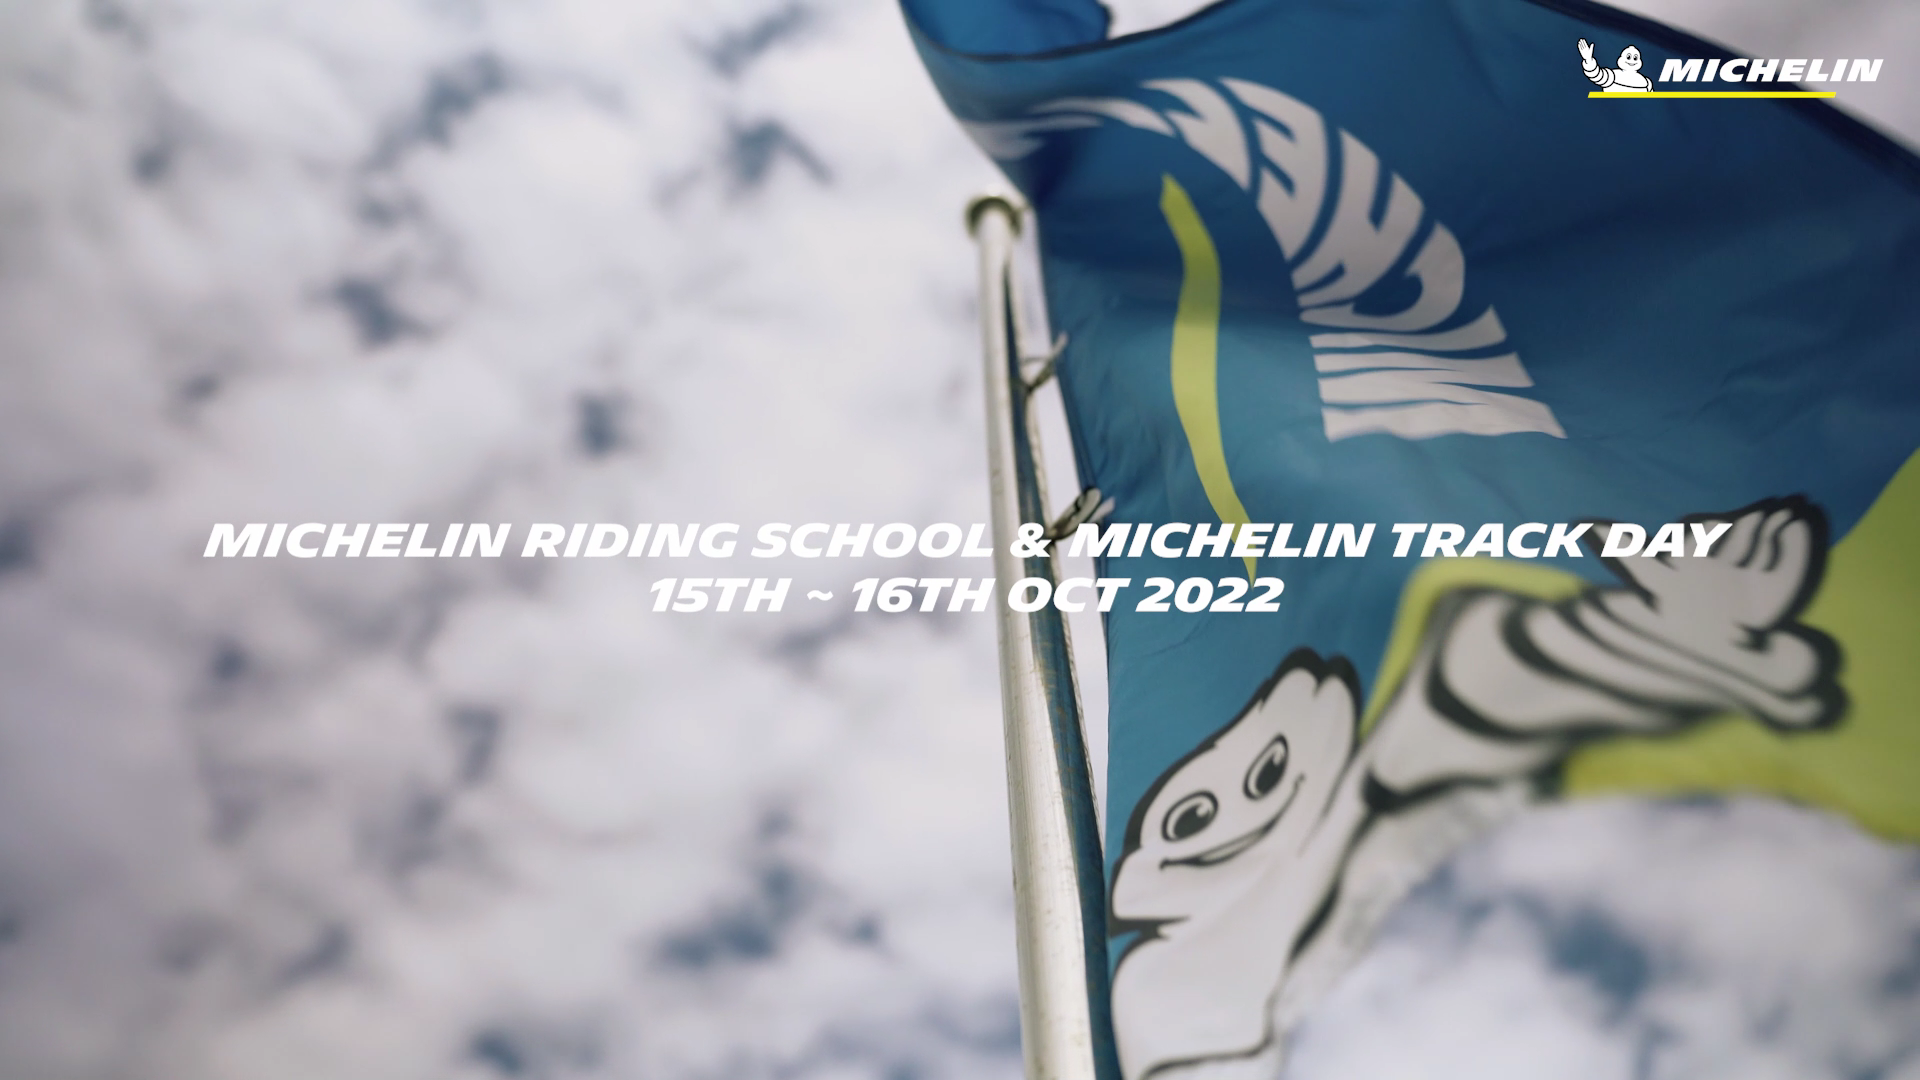 MICHELIN_Track_day_Riding_school_KR_20221108_V5.mp4_000009843.png